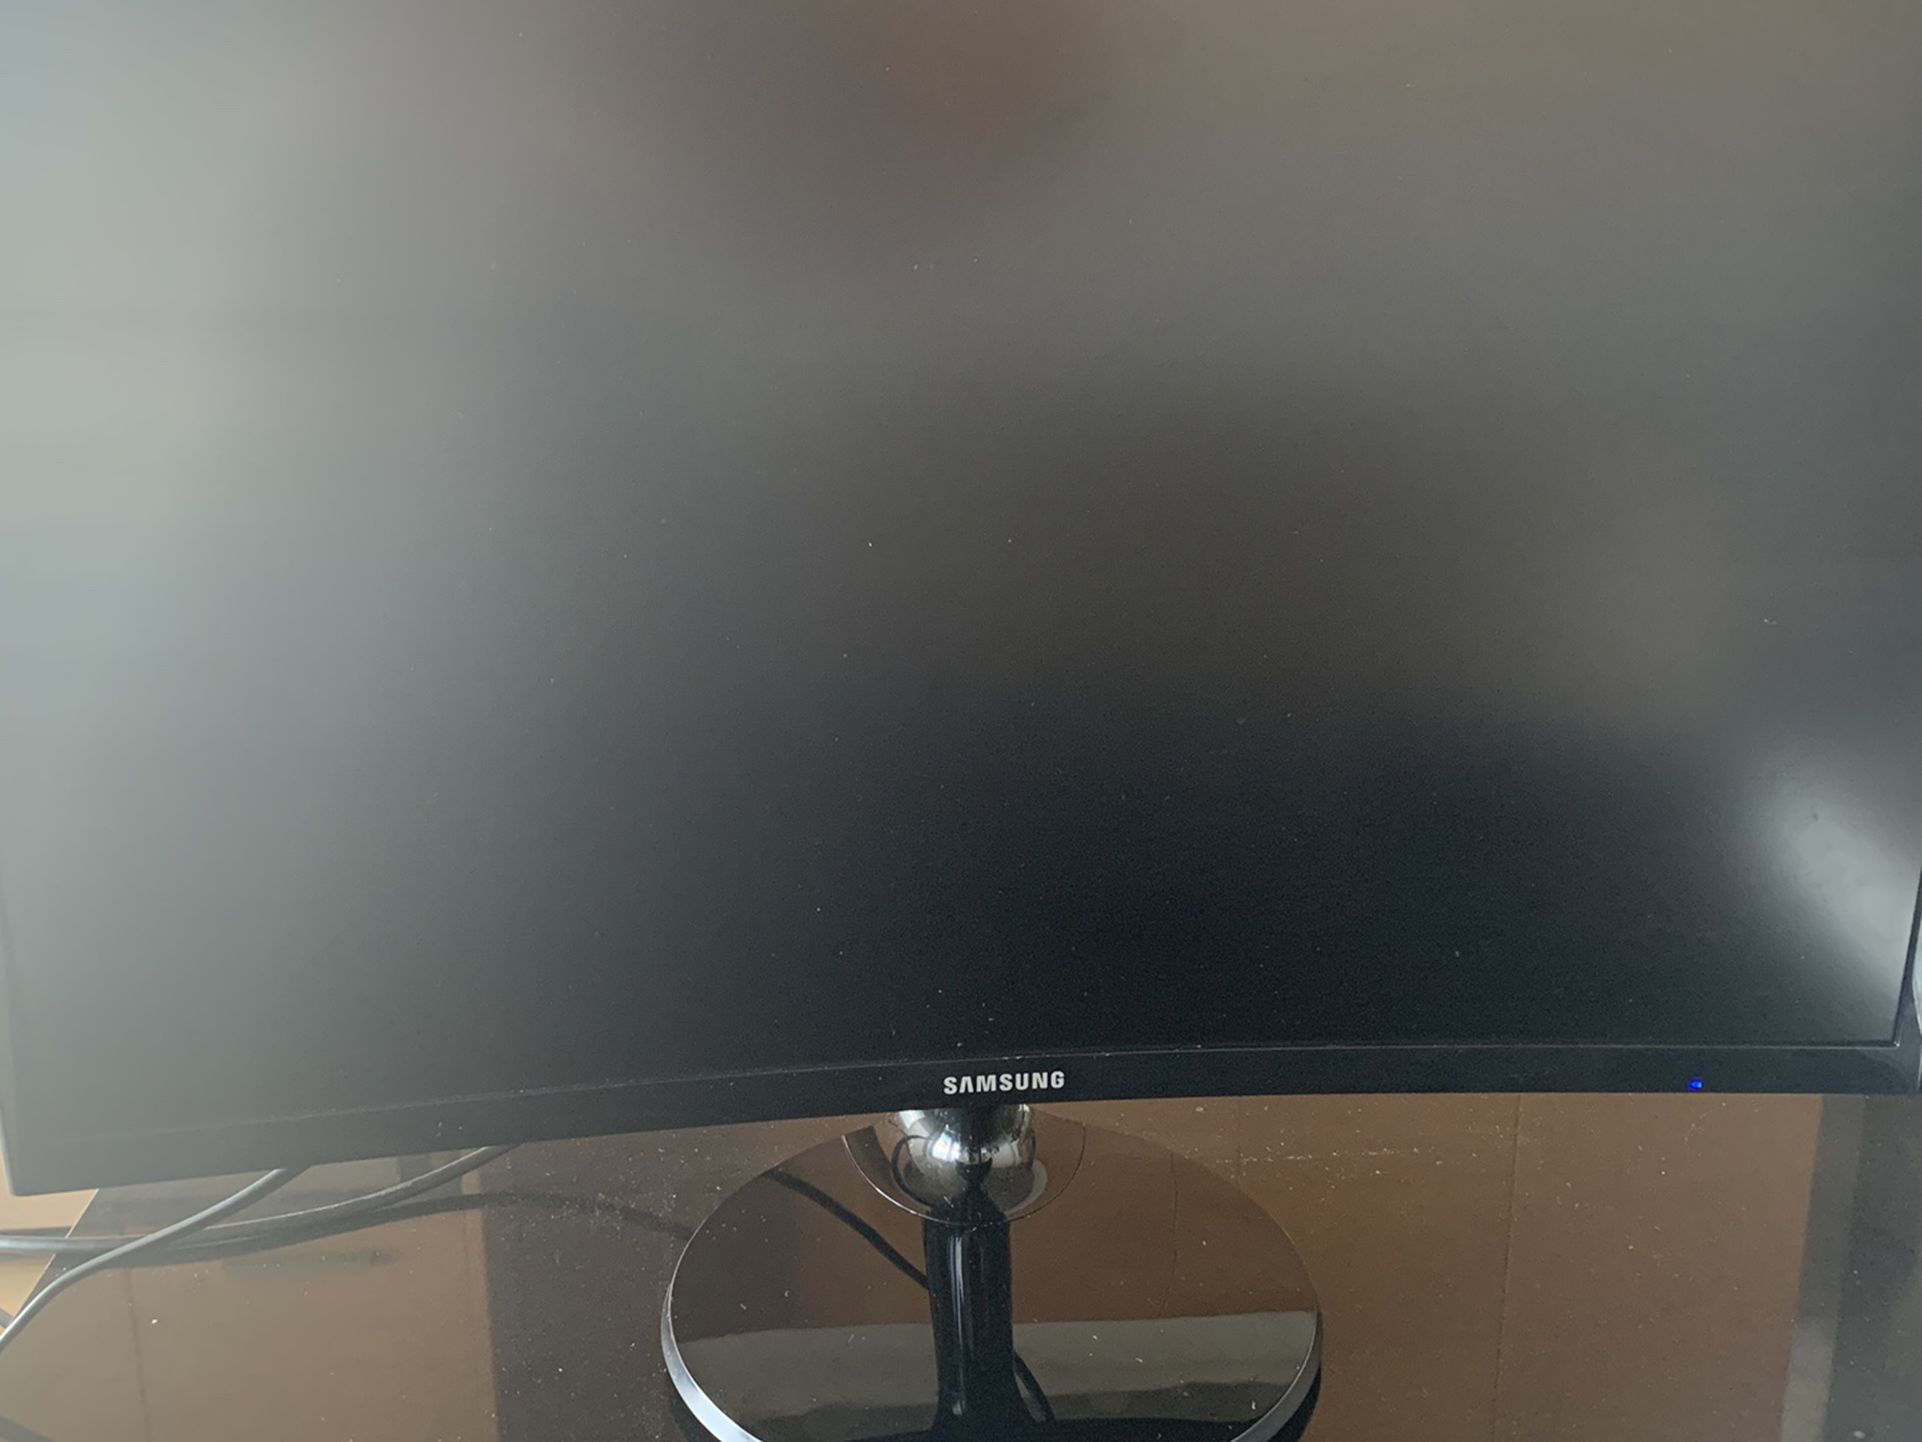 Samsung 24” LED Curved Monitor